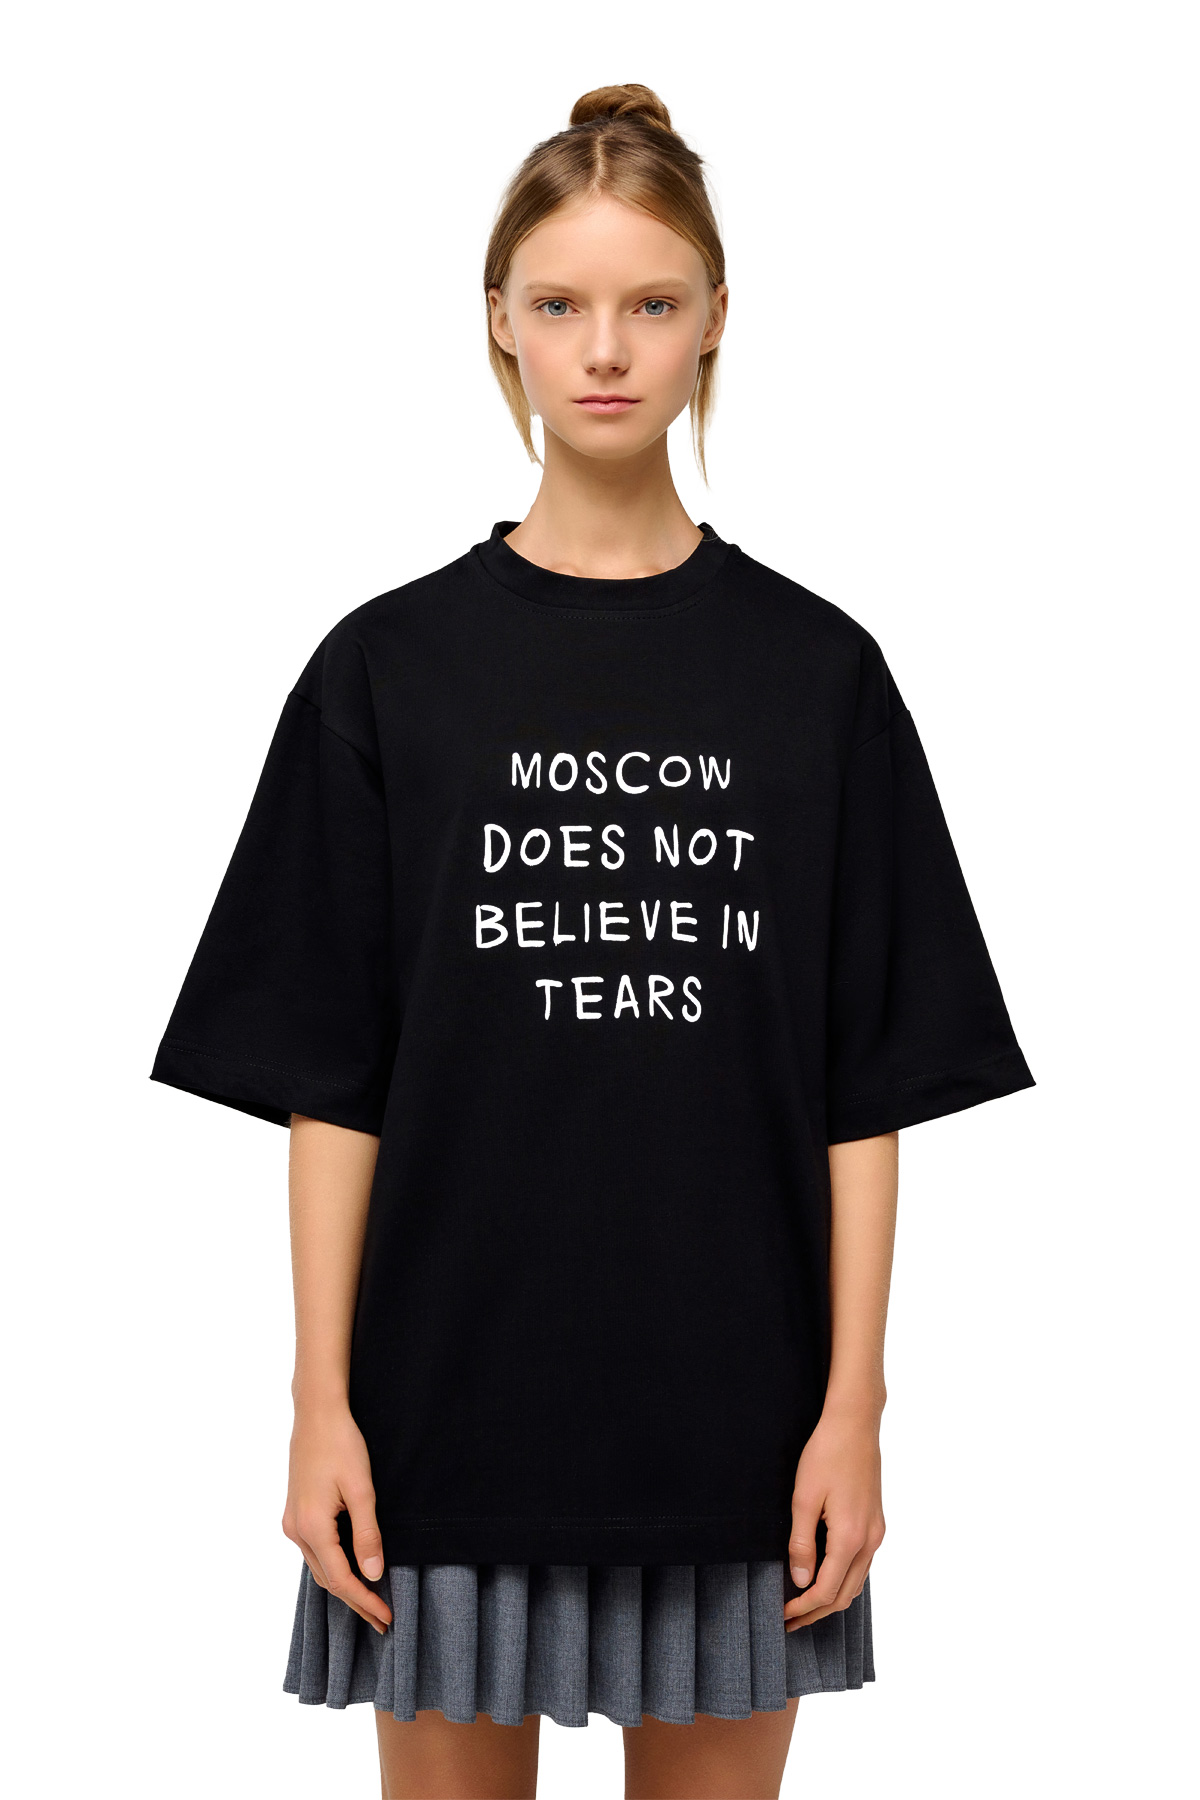 Moscow does not believe in tears T-shirt